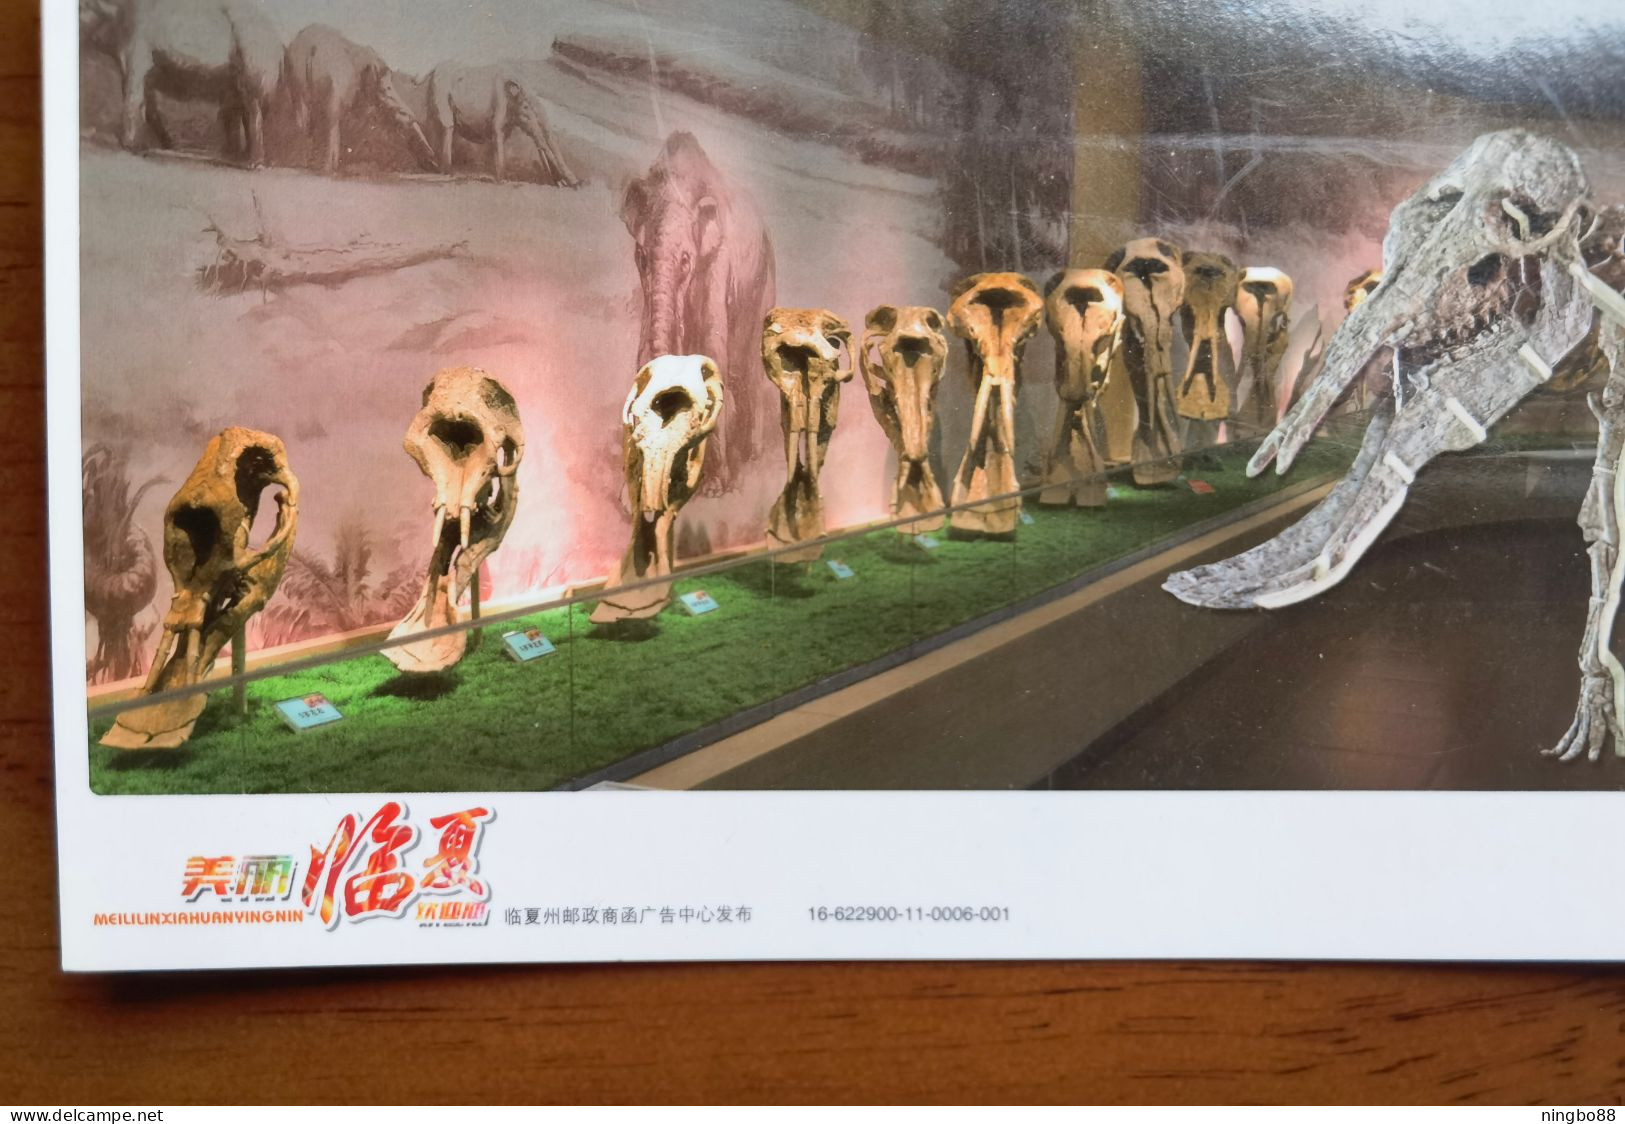 Linxia Platybelodon Danovi Elephant Fossil,China 2016 Hezheng Ancient Animal Fossil Museum Advertising Pre-stamped Card - Fossili